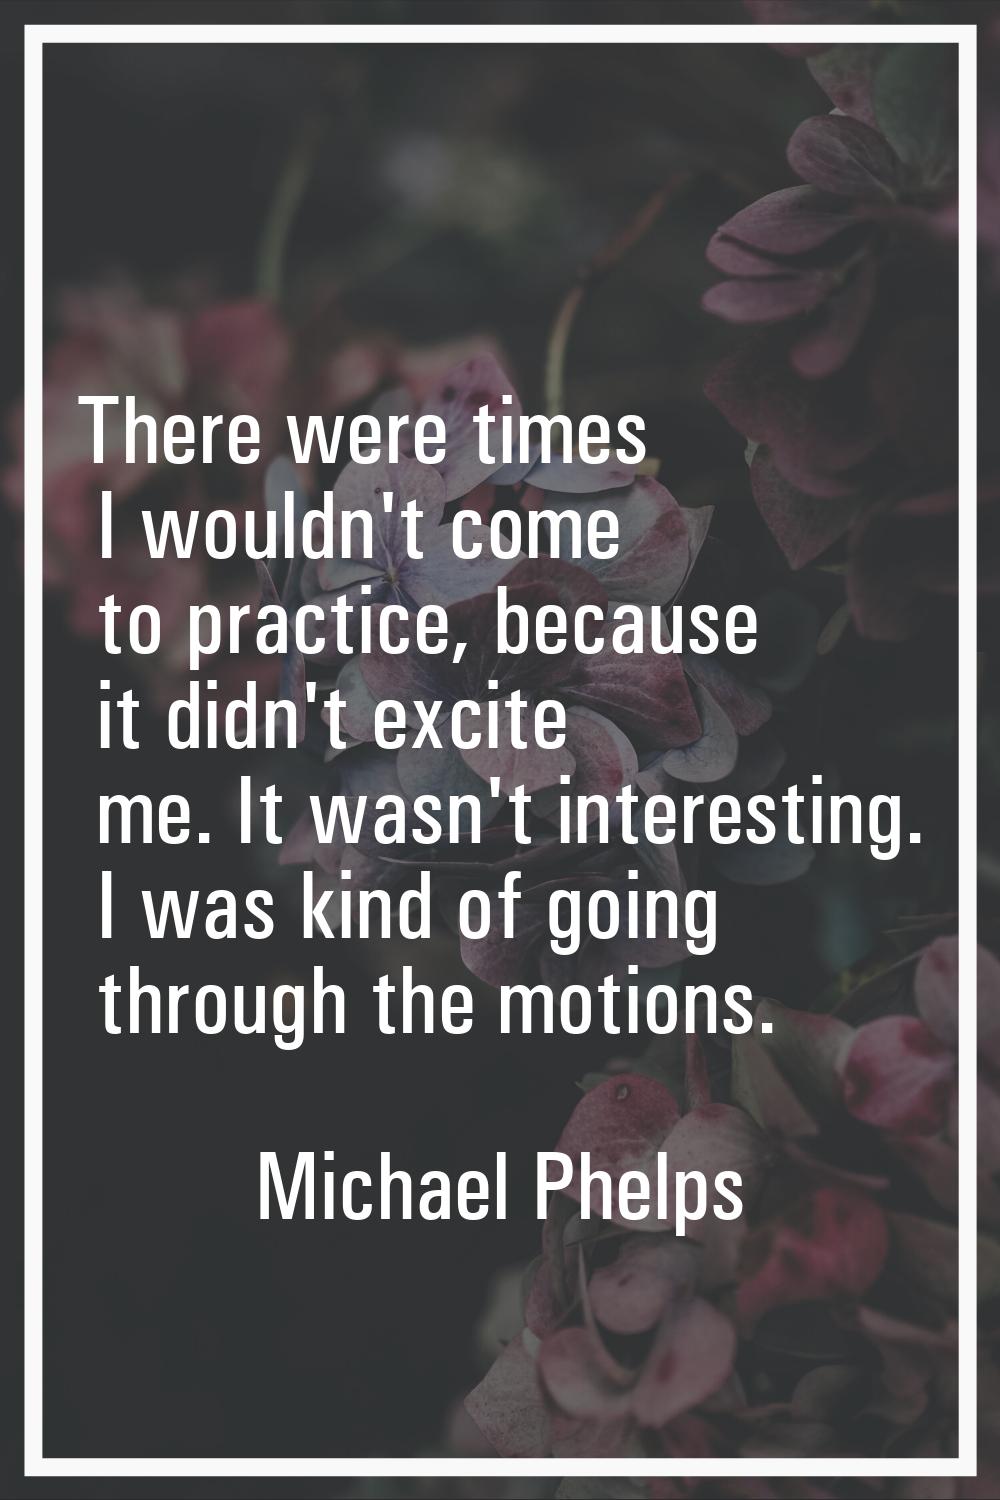 There were times I wouldn't come to practice, because it didn't excite me. It wasn't interesting. I